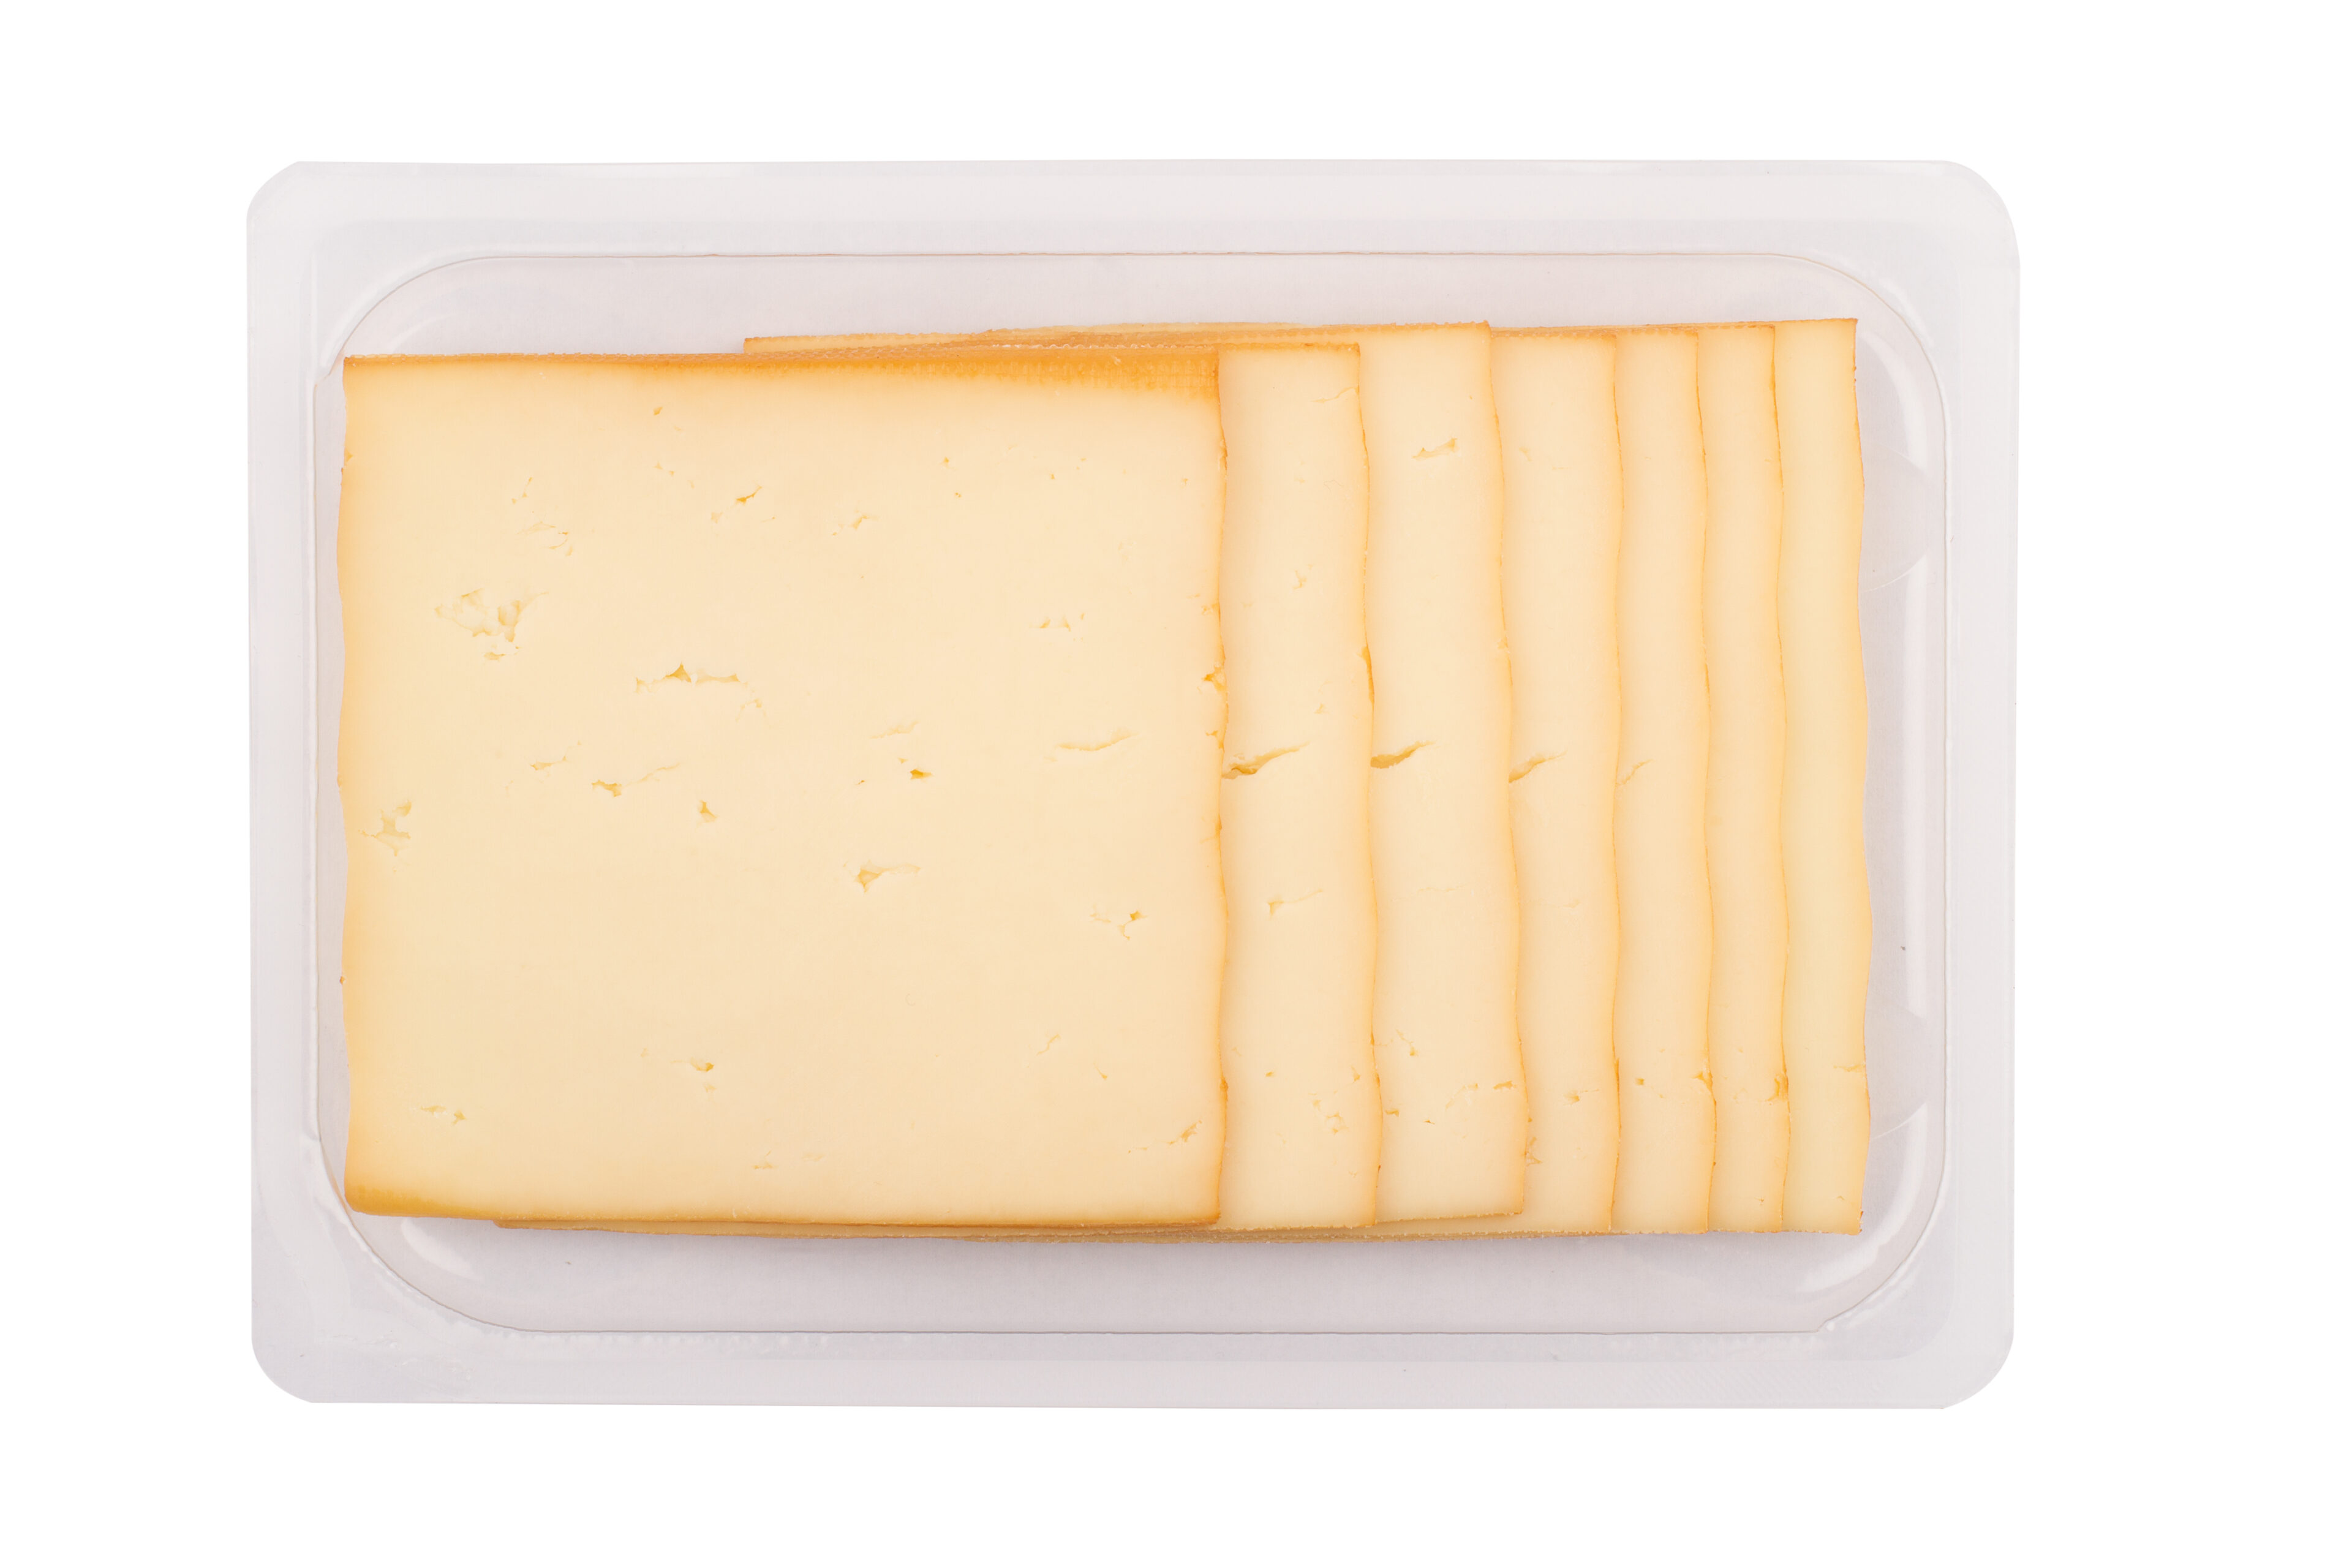 A Package Of Sliced Cheese